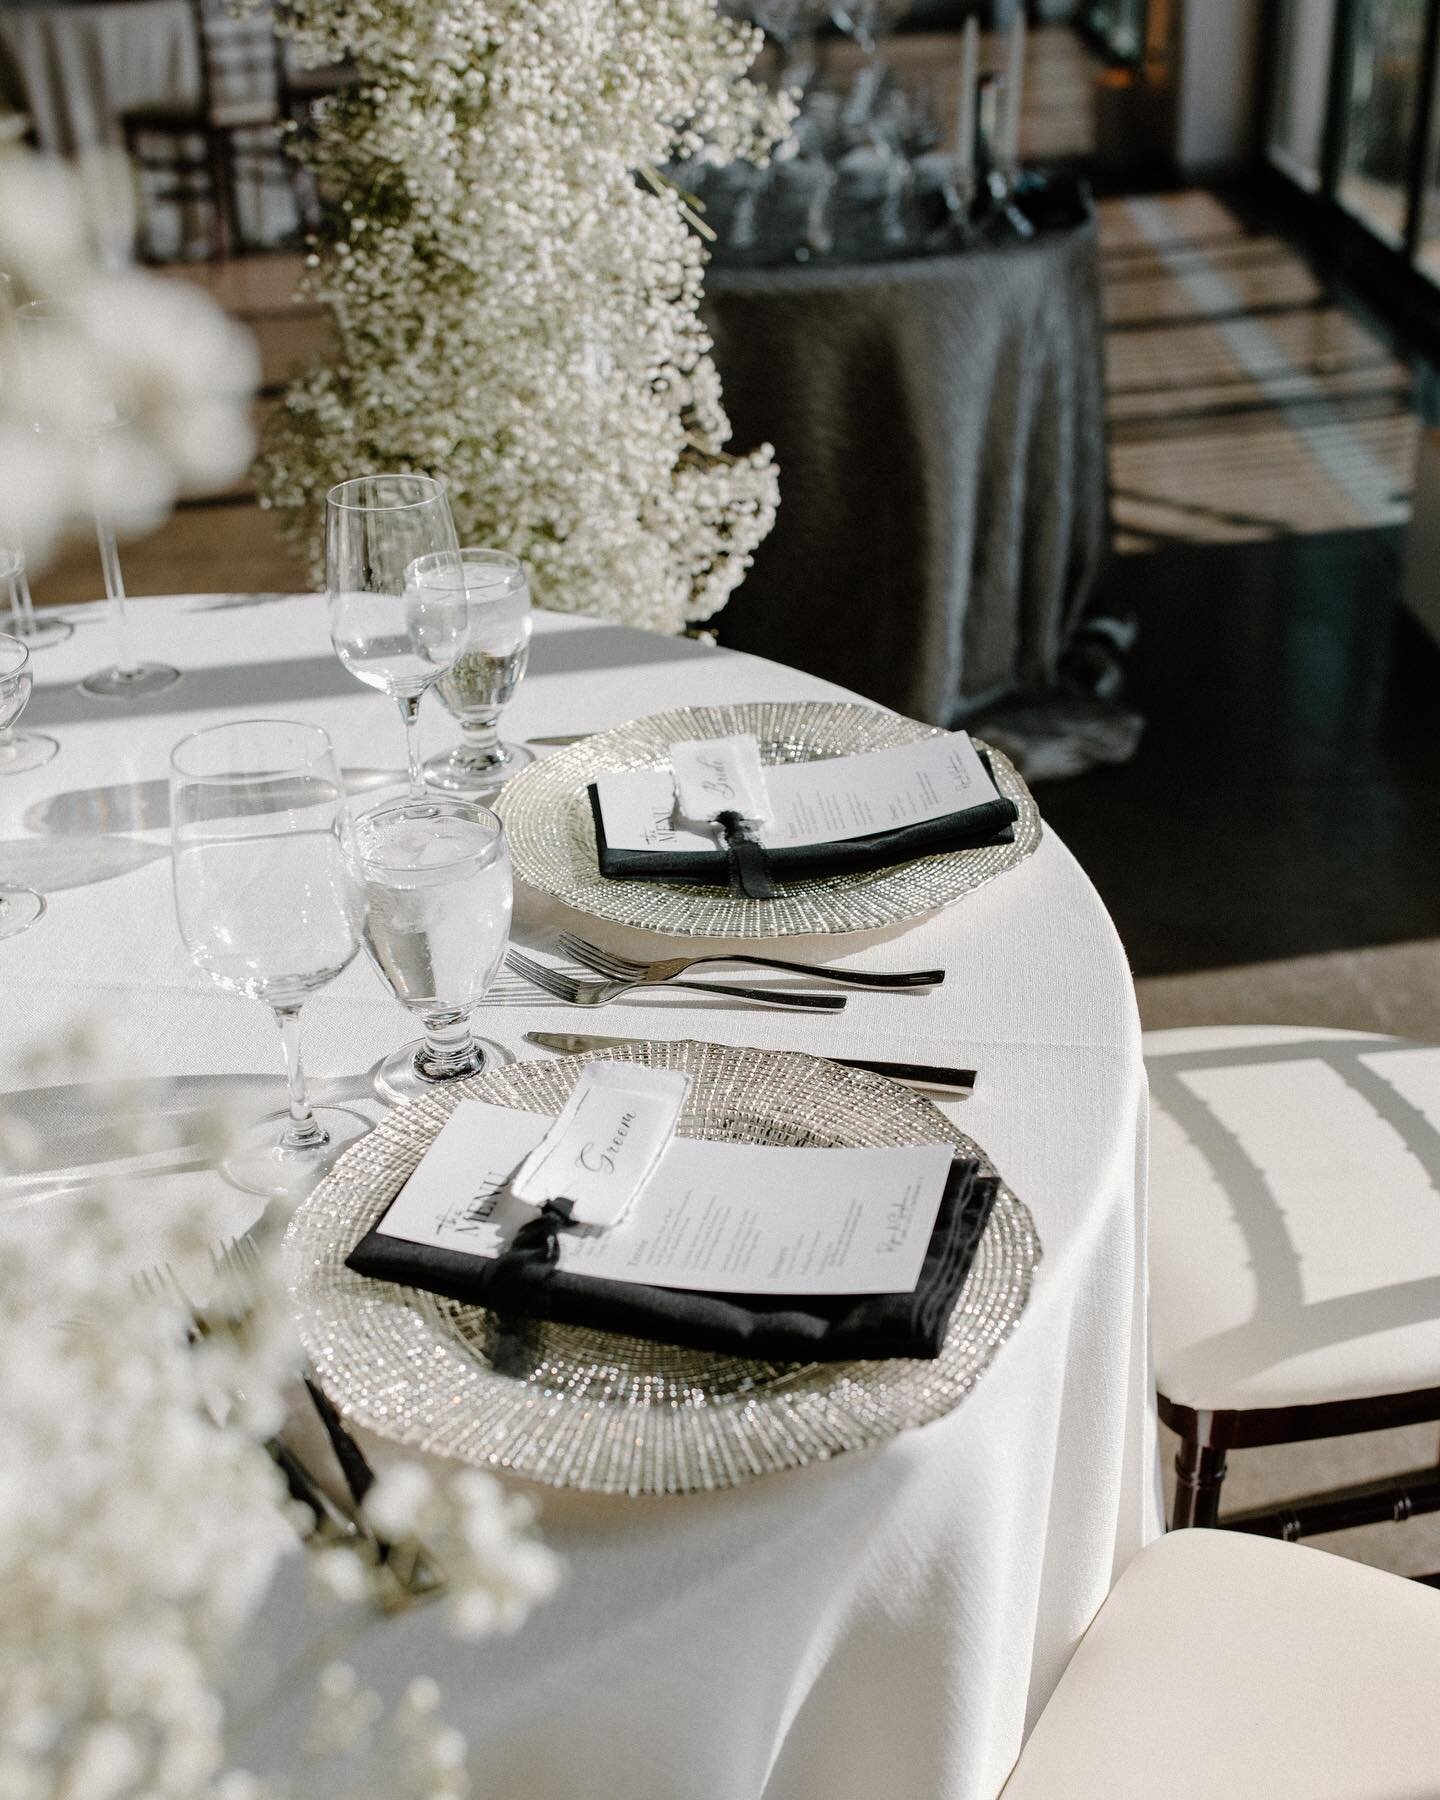 Modern and Minimal
Designed with thoughtful details from custom name cards made with vellum paper to mixed neutral tone @tonoandco ribbons to indicate meal entrees-

Planning and Design: Harlene Events
Venue: @bridgesgolfsanramon 
Photography: @alyto